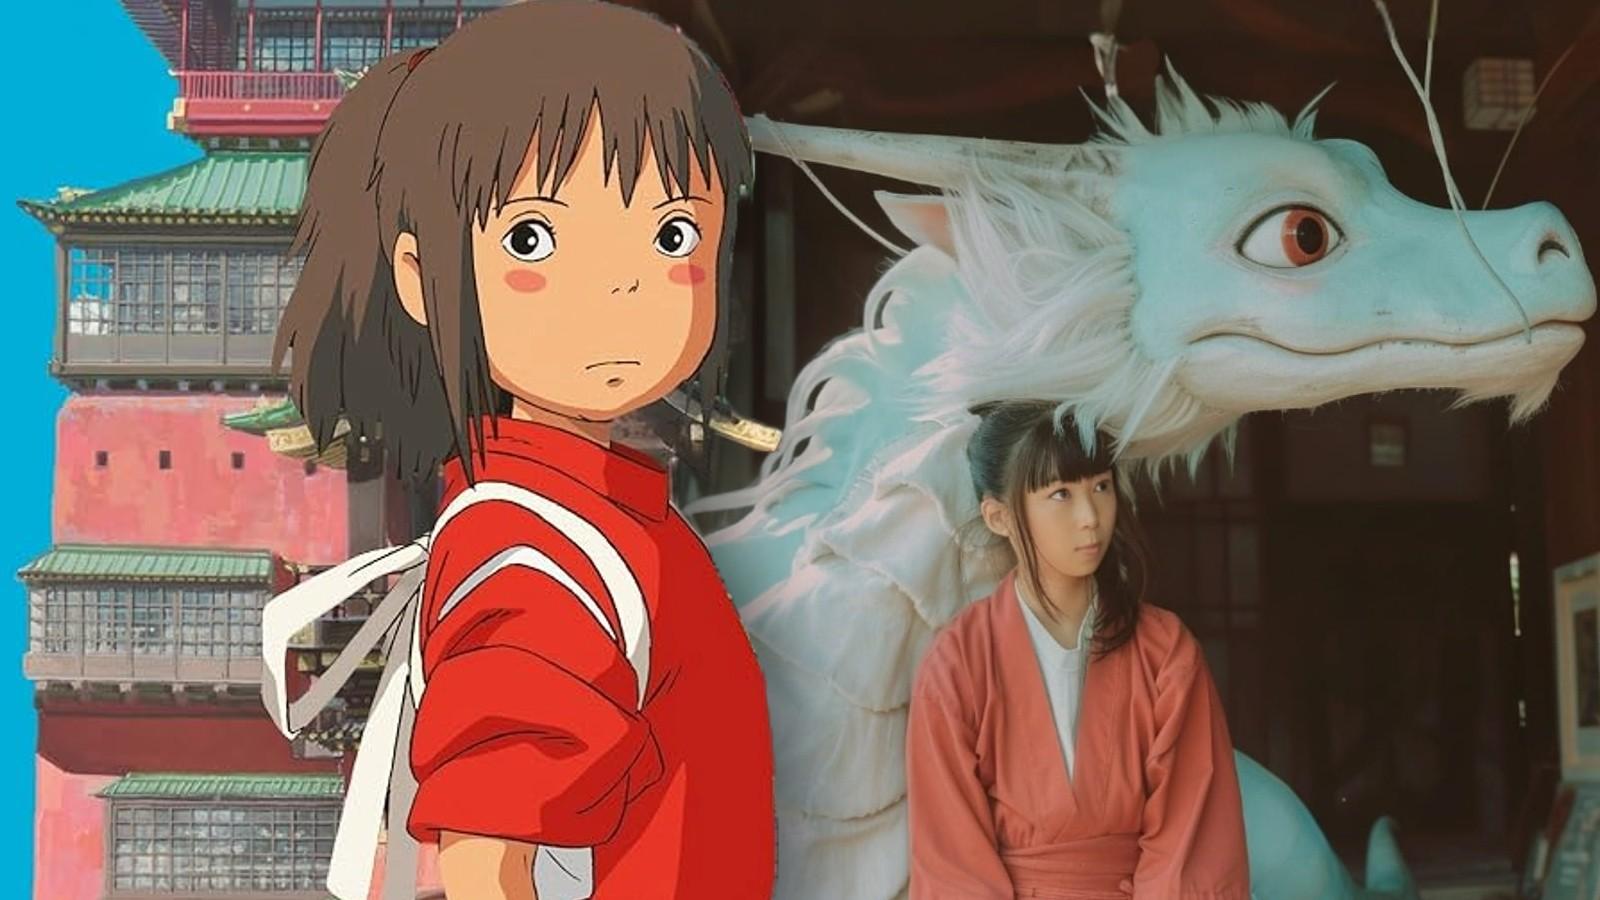 Chihiro in the original Spirited Away and the fake poster for the Netflix TV series